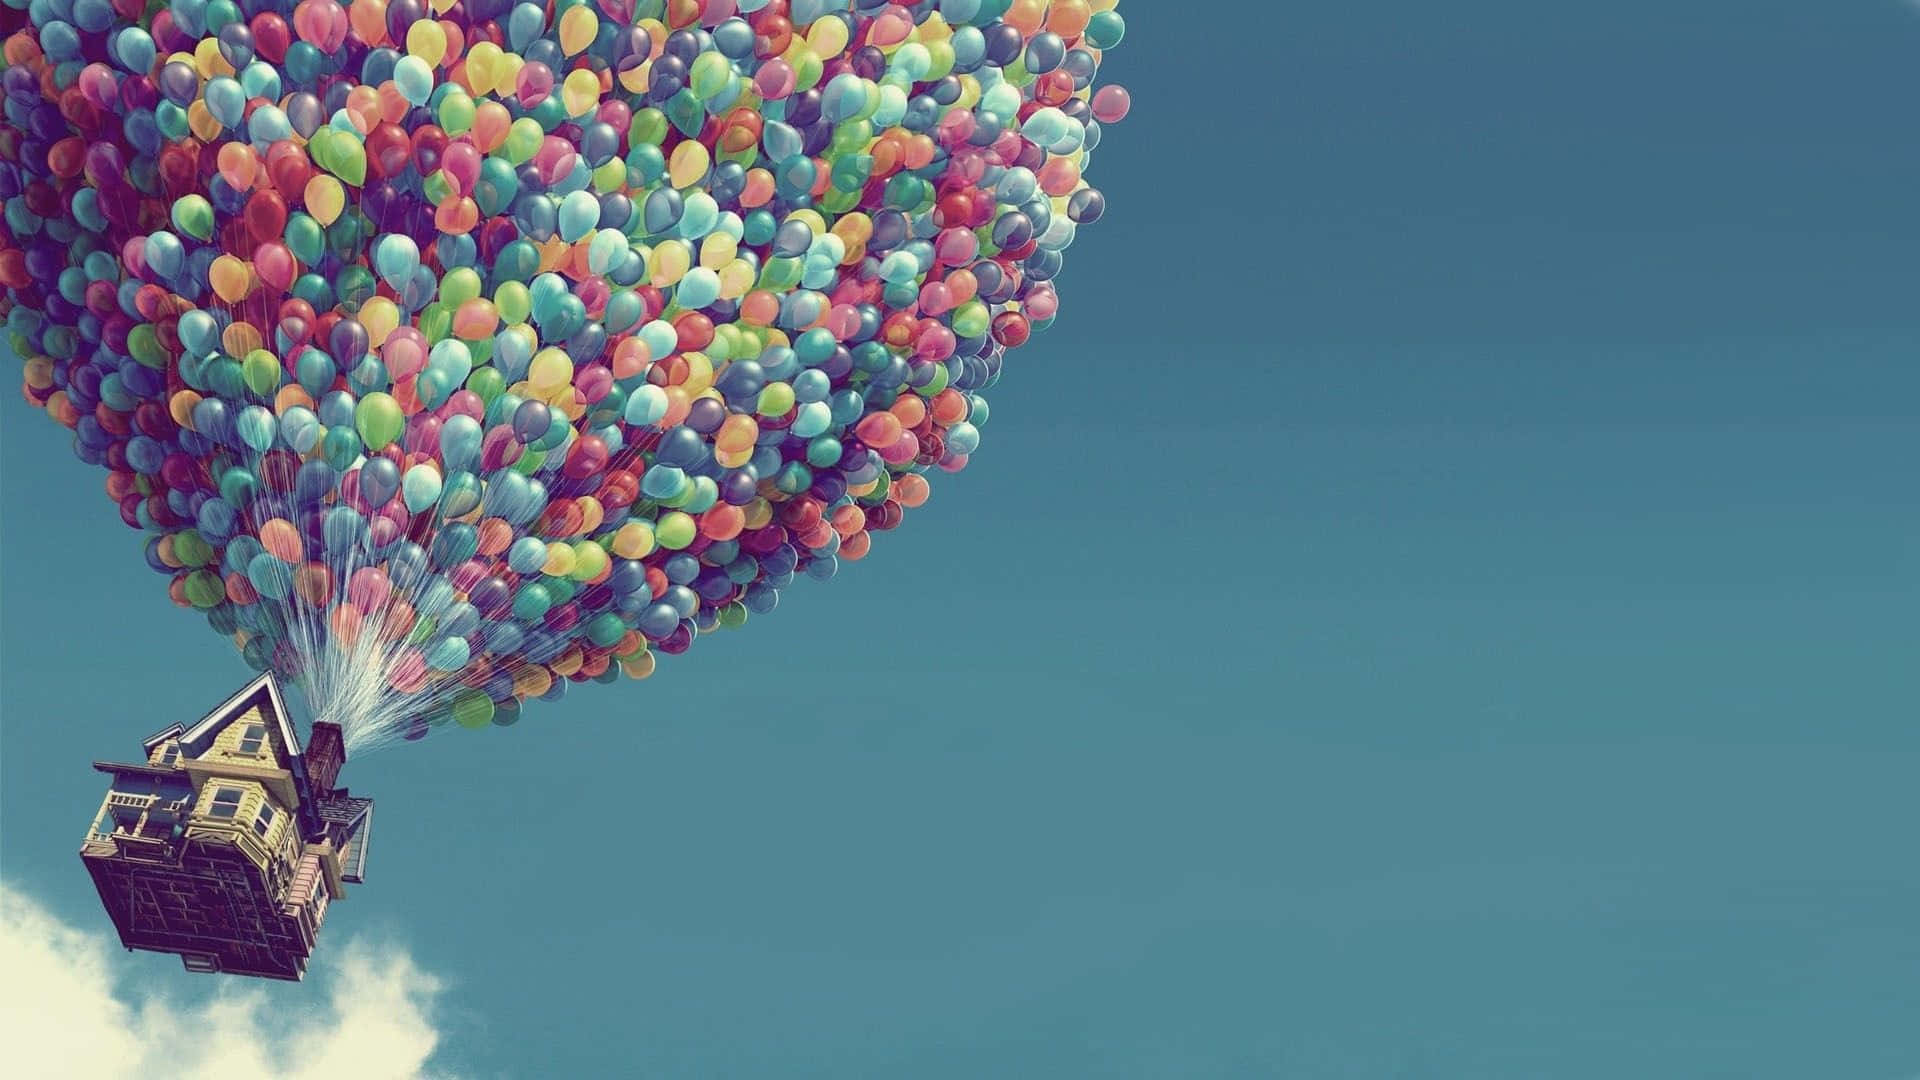 A House With Balloons Flying In The Sky Wallpaper